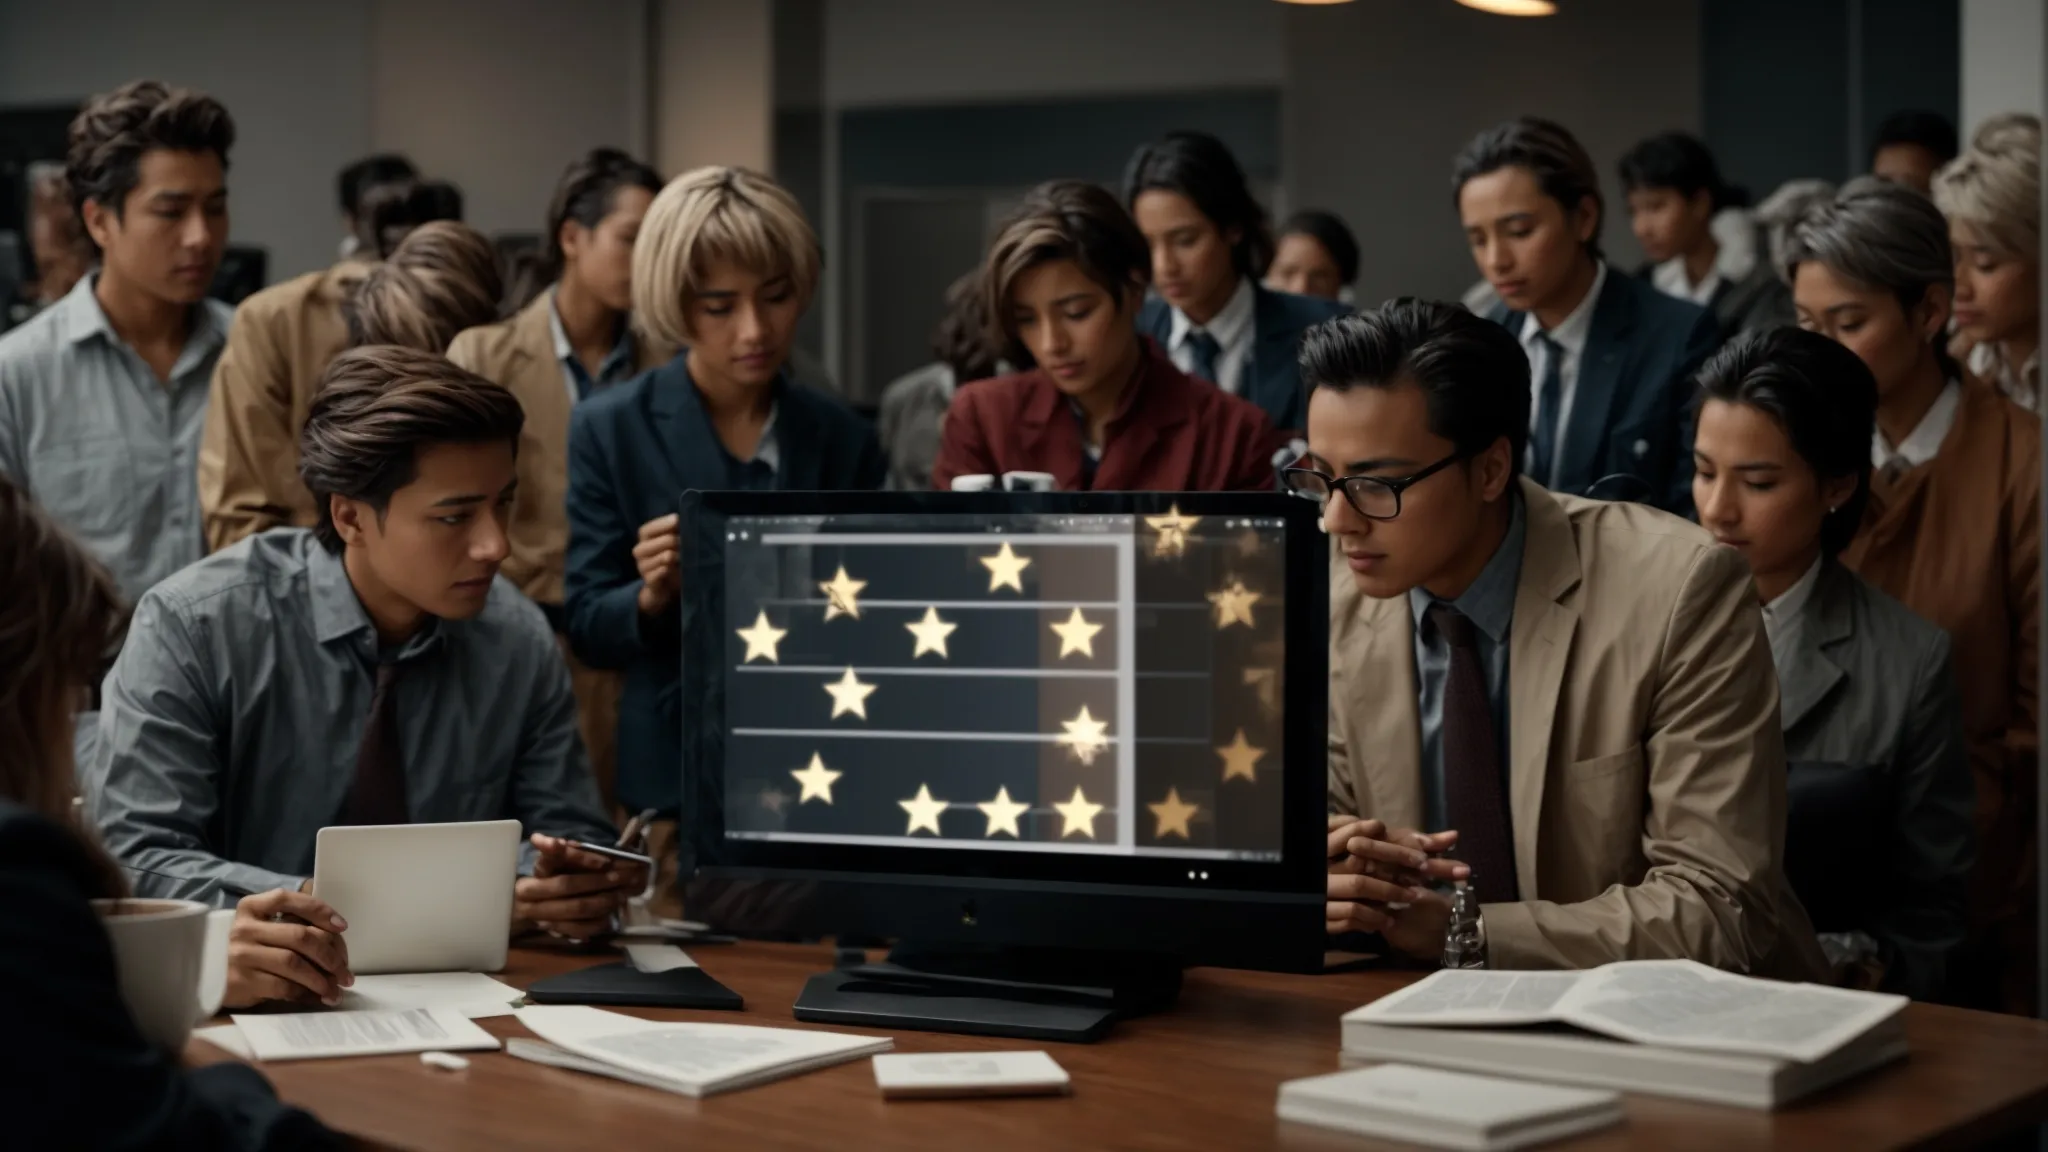 a group of professionals gathered around a computer, displaying five stars on the screen.